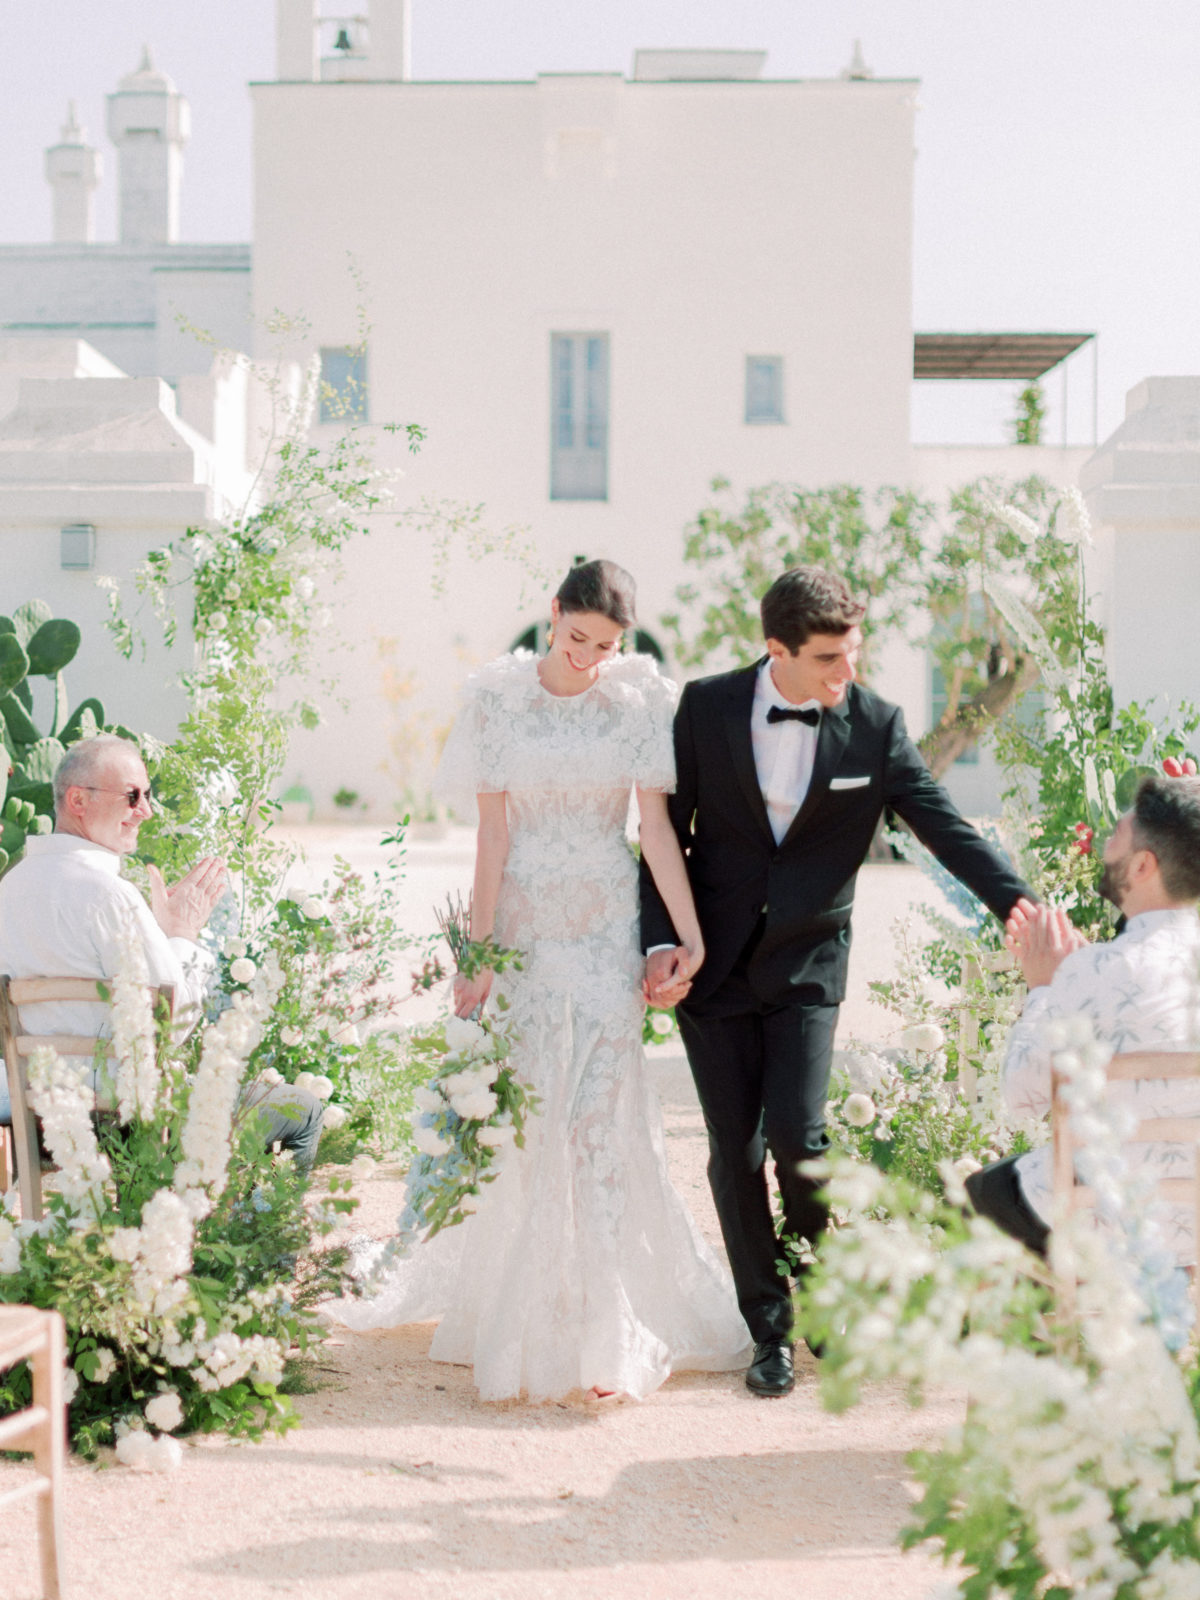 Bride and groom walking down aisle after wedding ceremony in Polignano Puglia